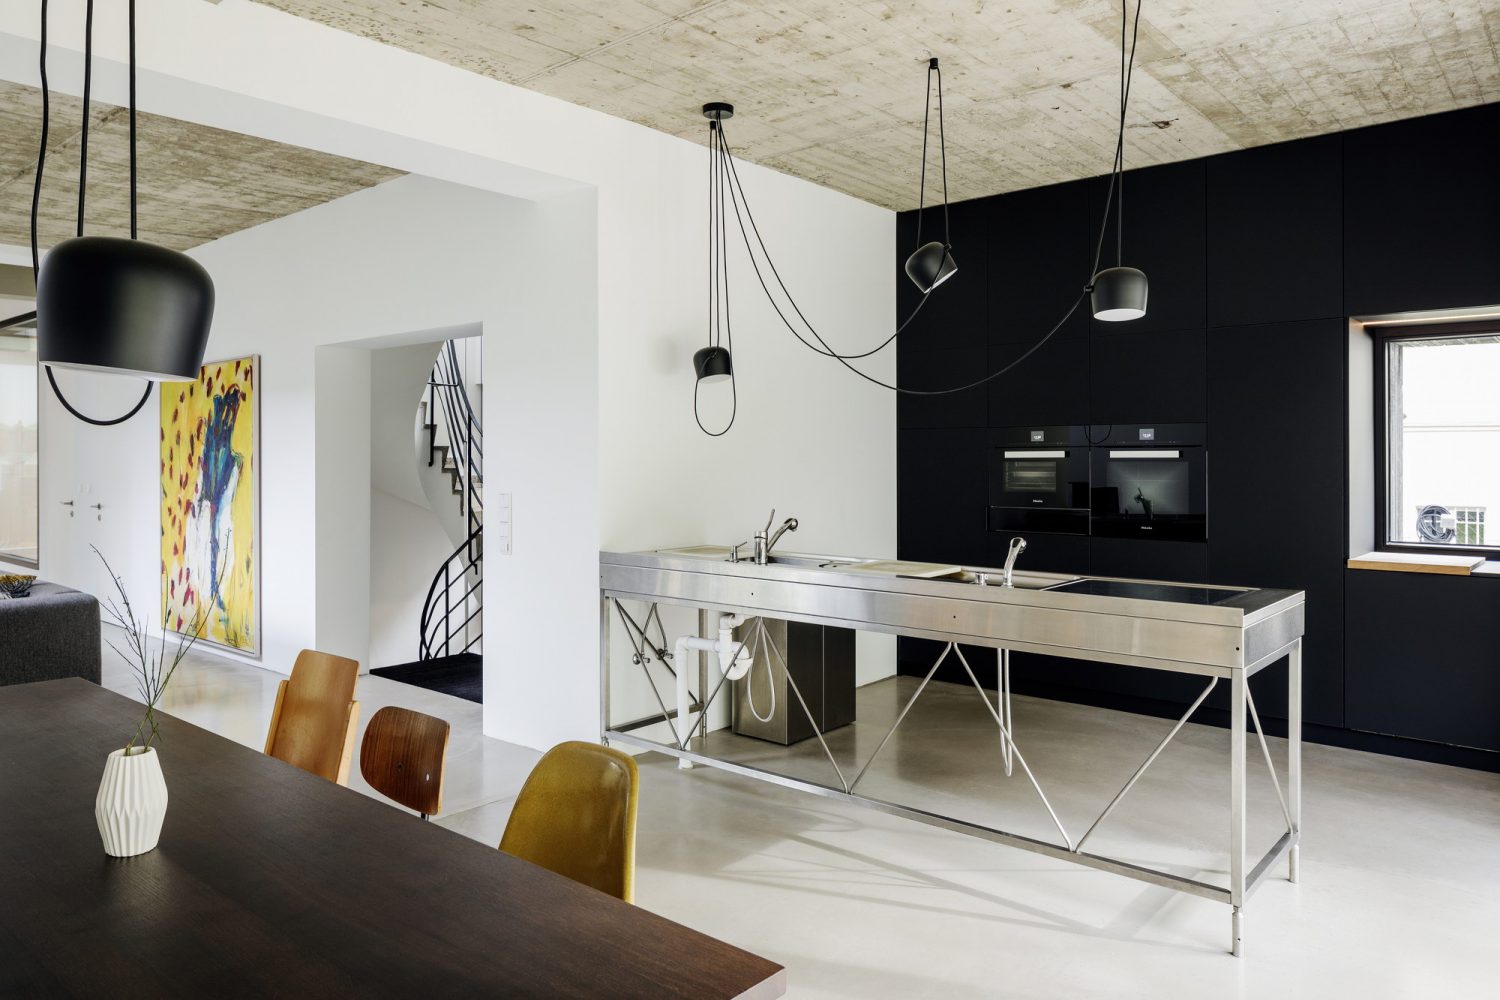 A28 House | SEHW Architektur turned Industrial Building into Home